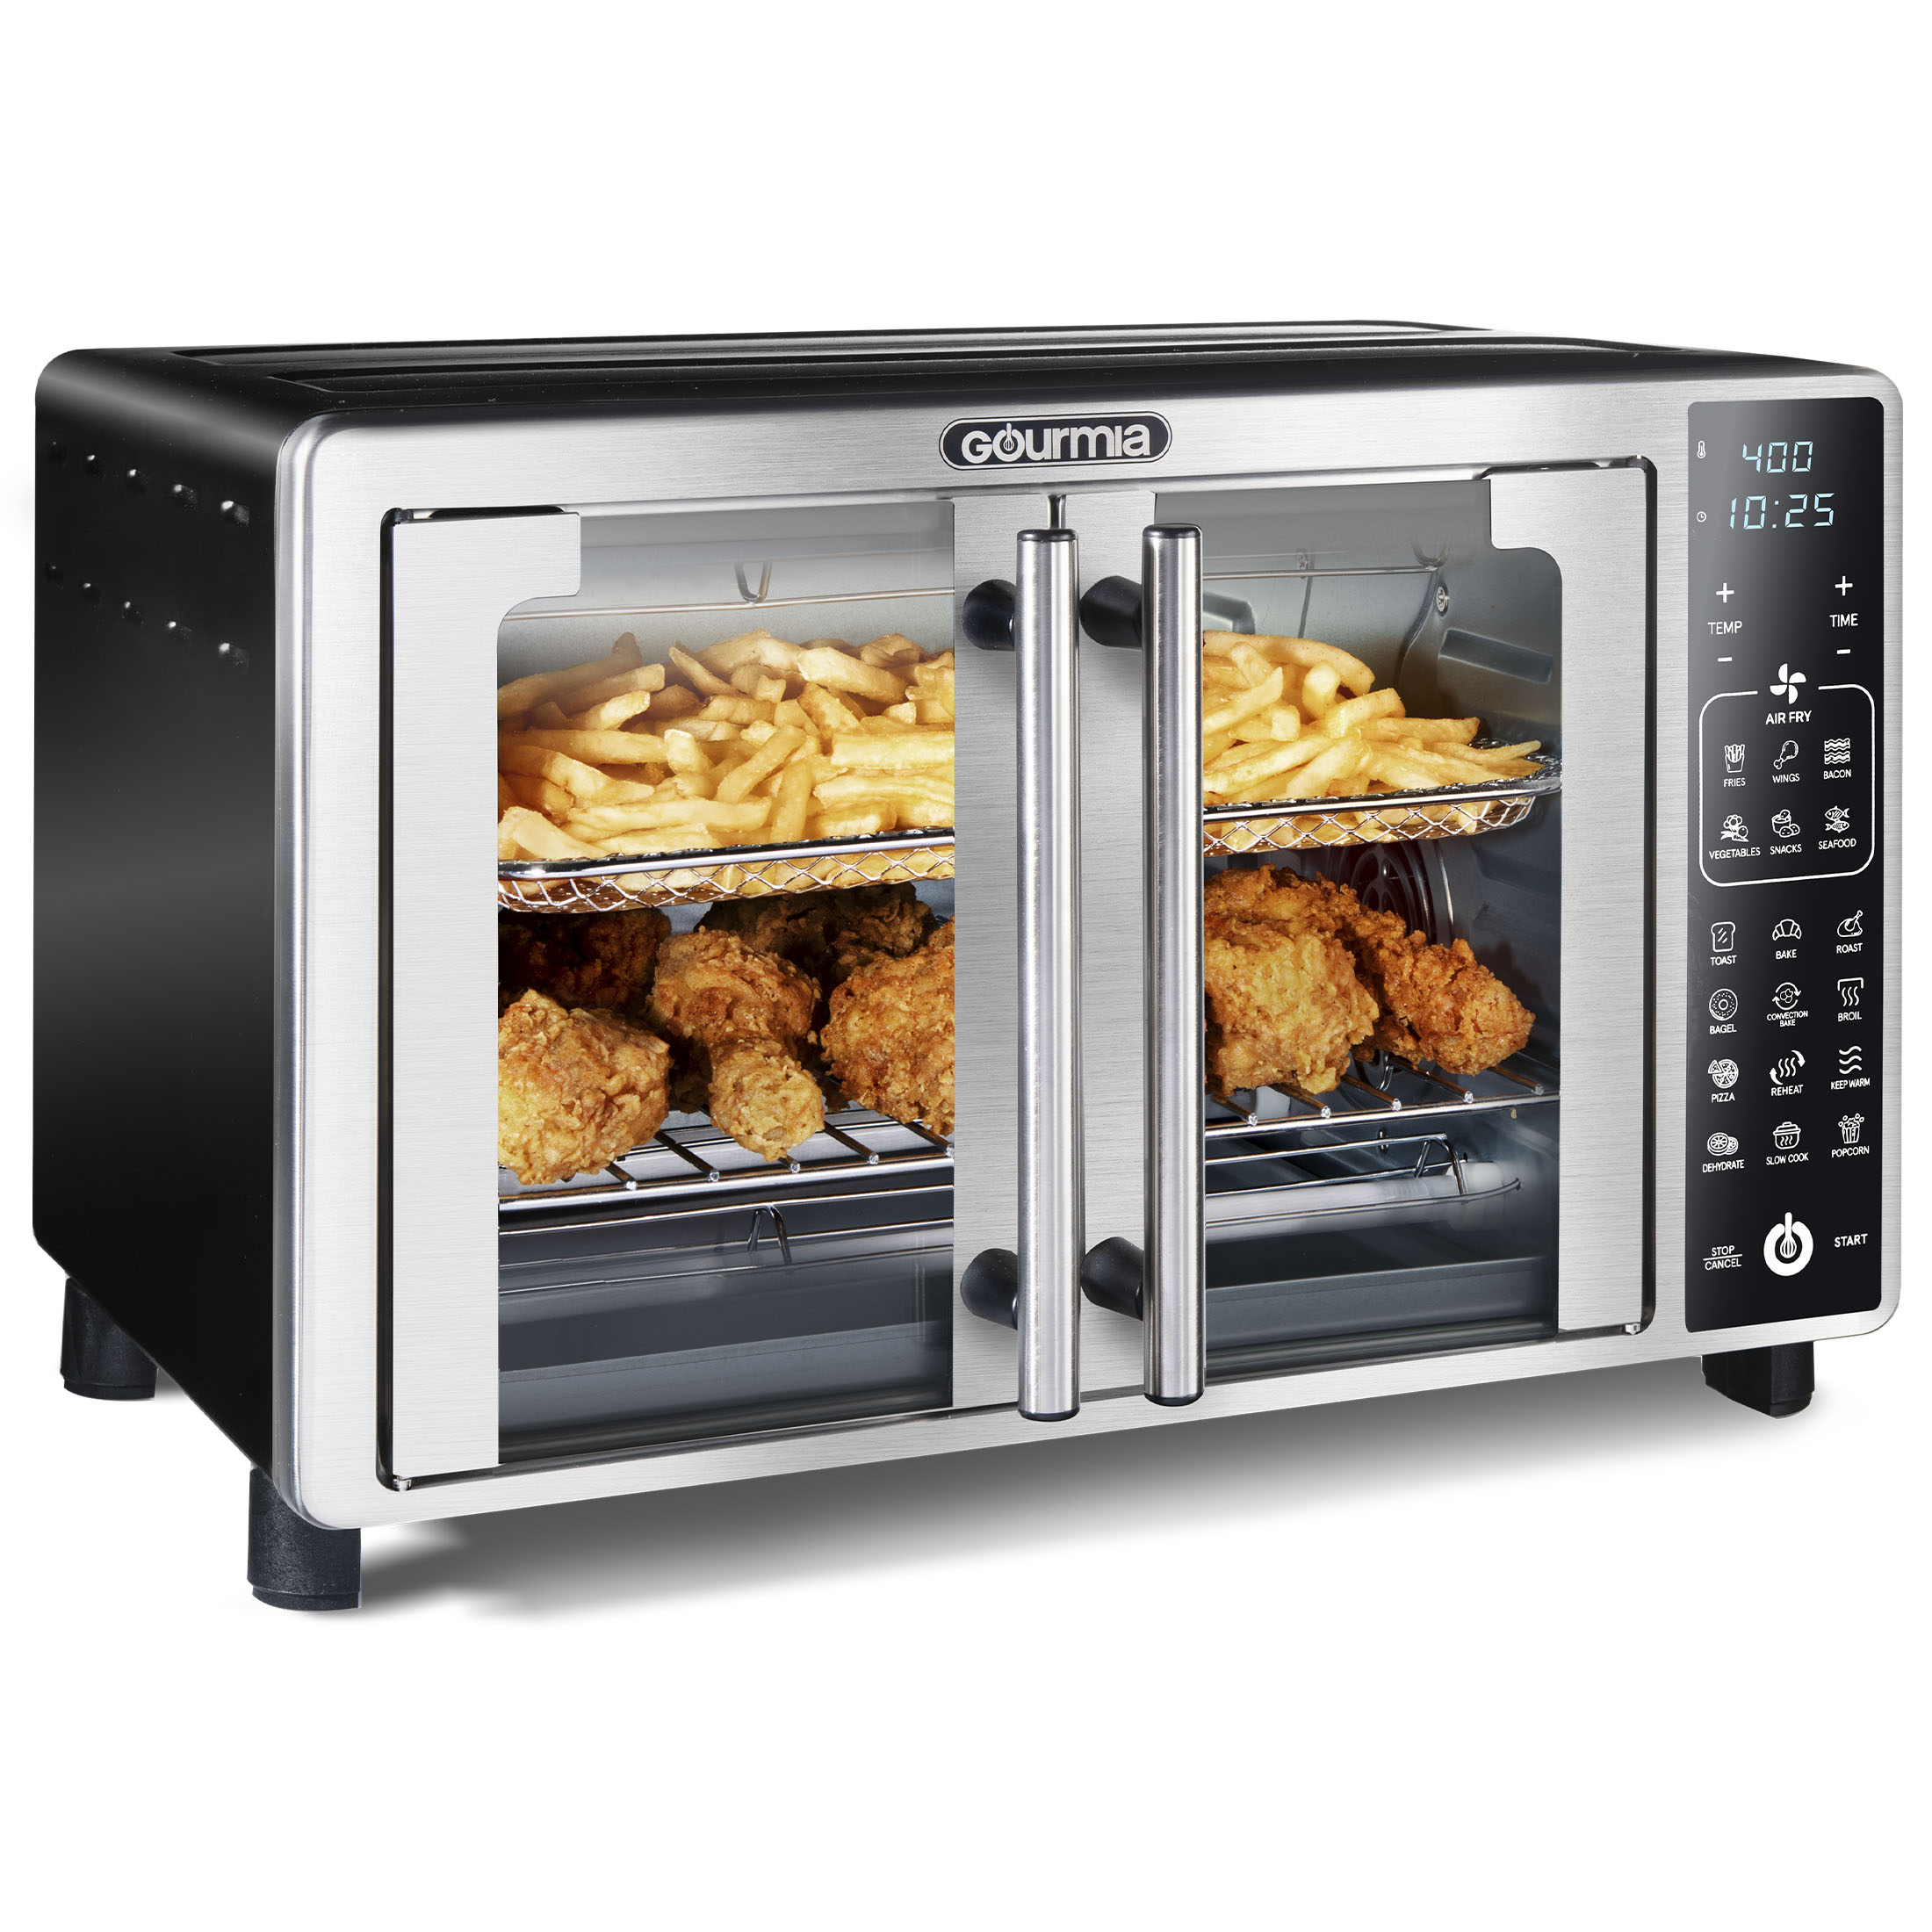 Gourmia Digital Air Fryer Toaster Oven with Single-Pull French Doors, New - image 5 of 7